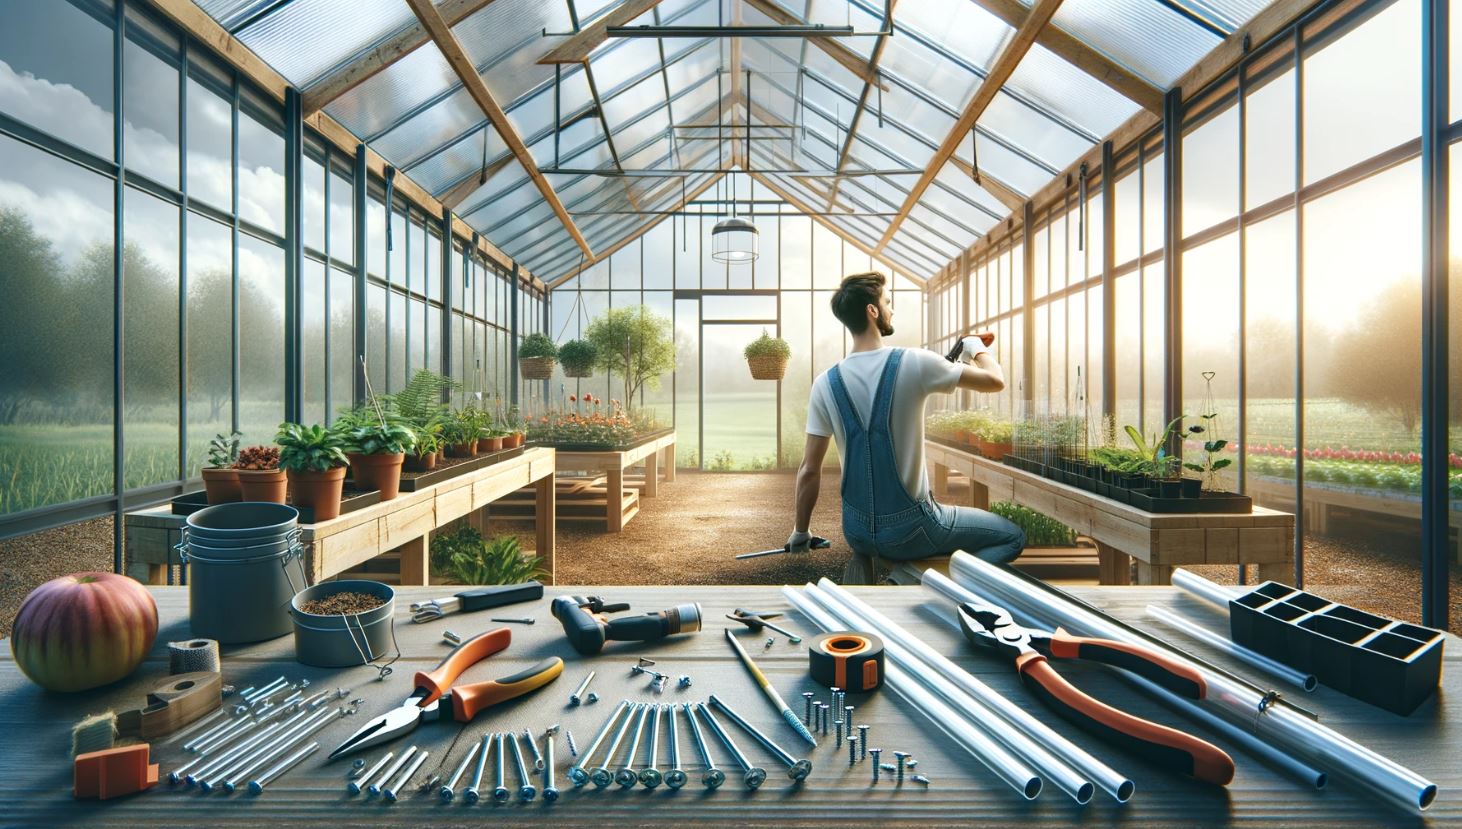 How To Secure Polycarbonate Panels In a Greenhouse